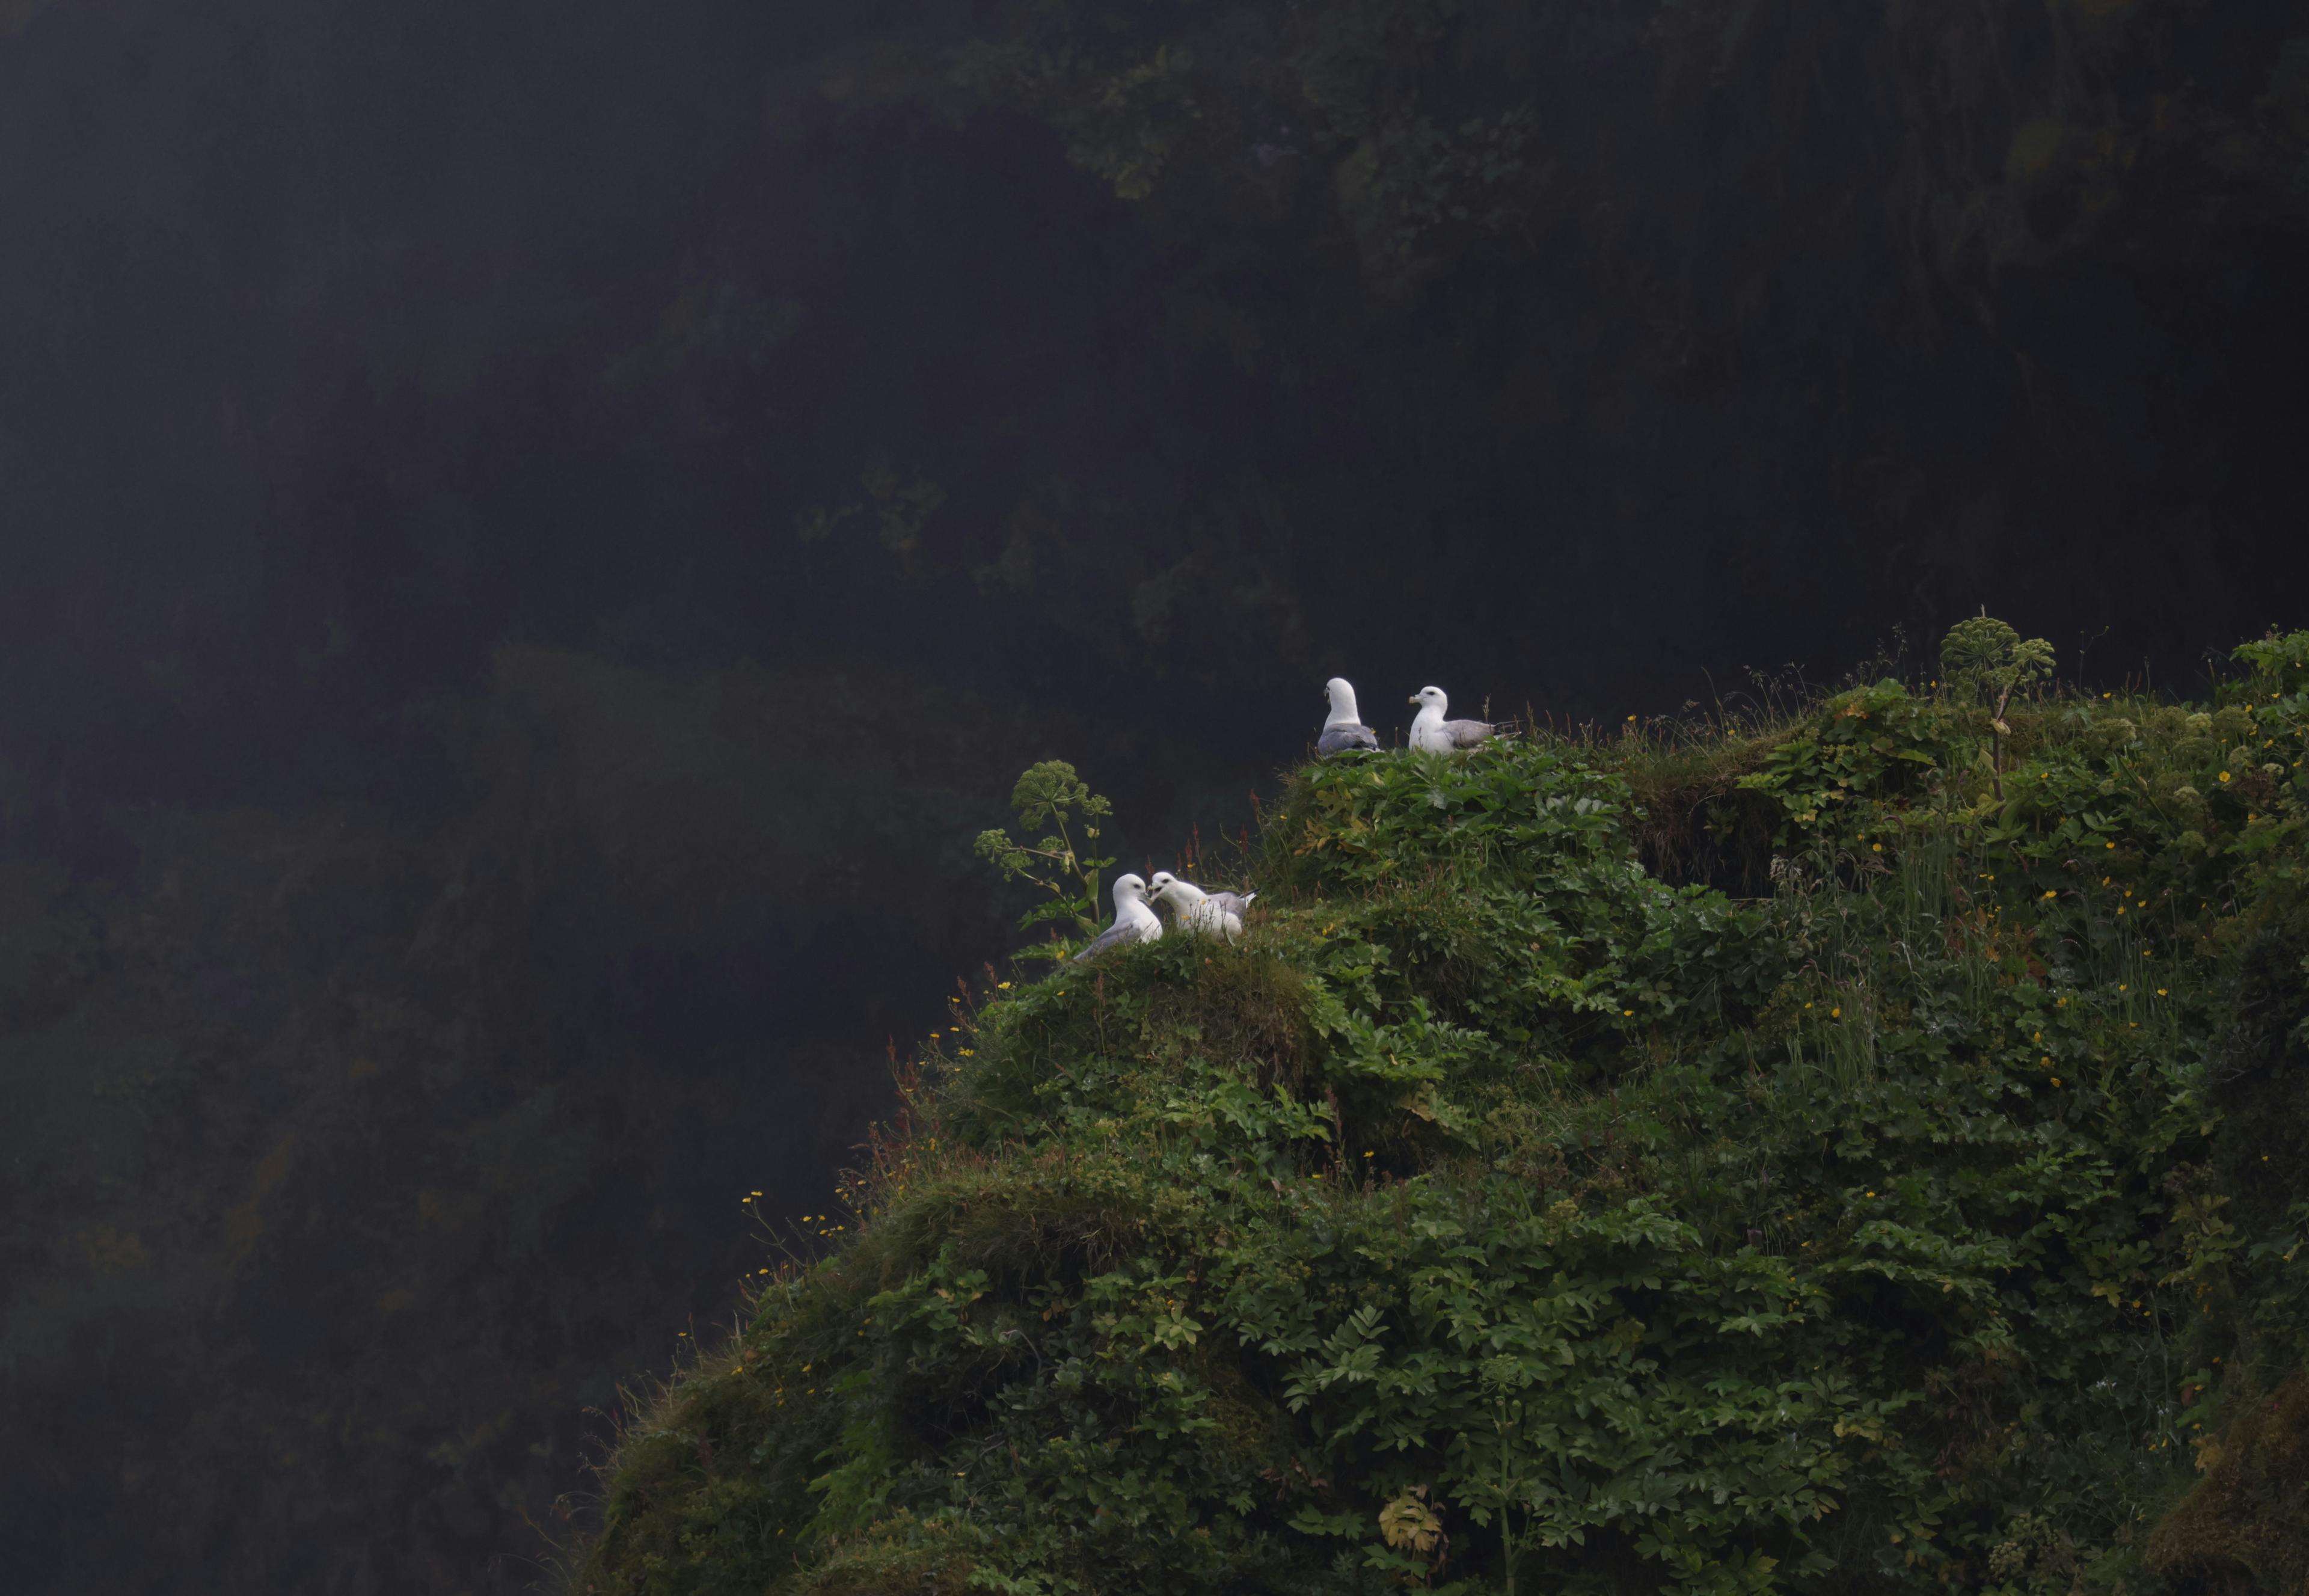 "Three white birds perched on a lush green cliff, partially shrouded in mist, creating a serene and mysterious natural scene."